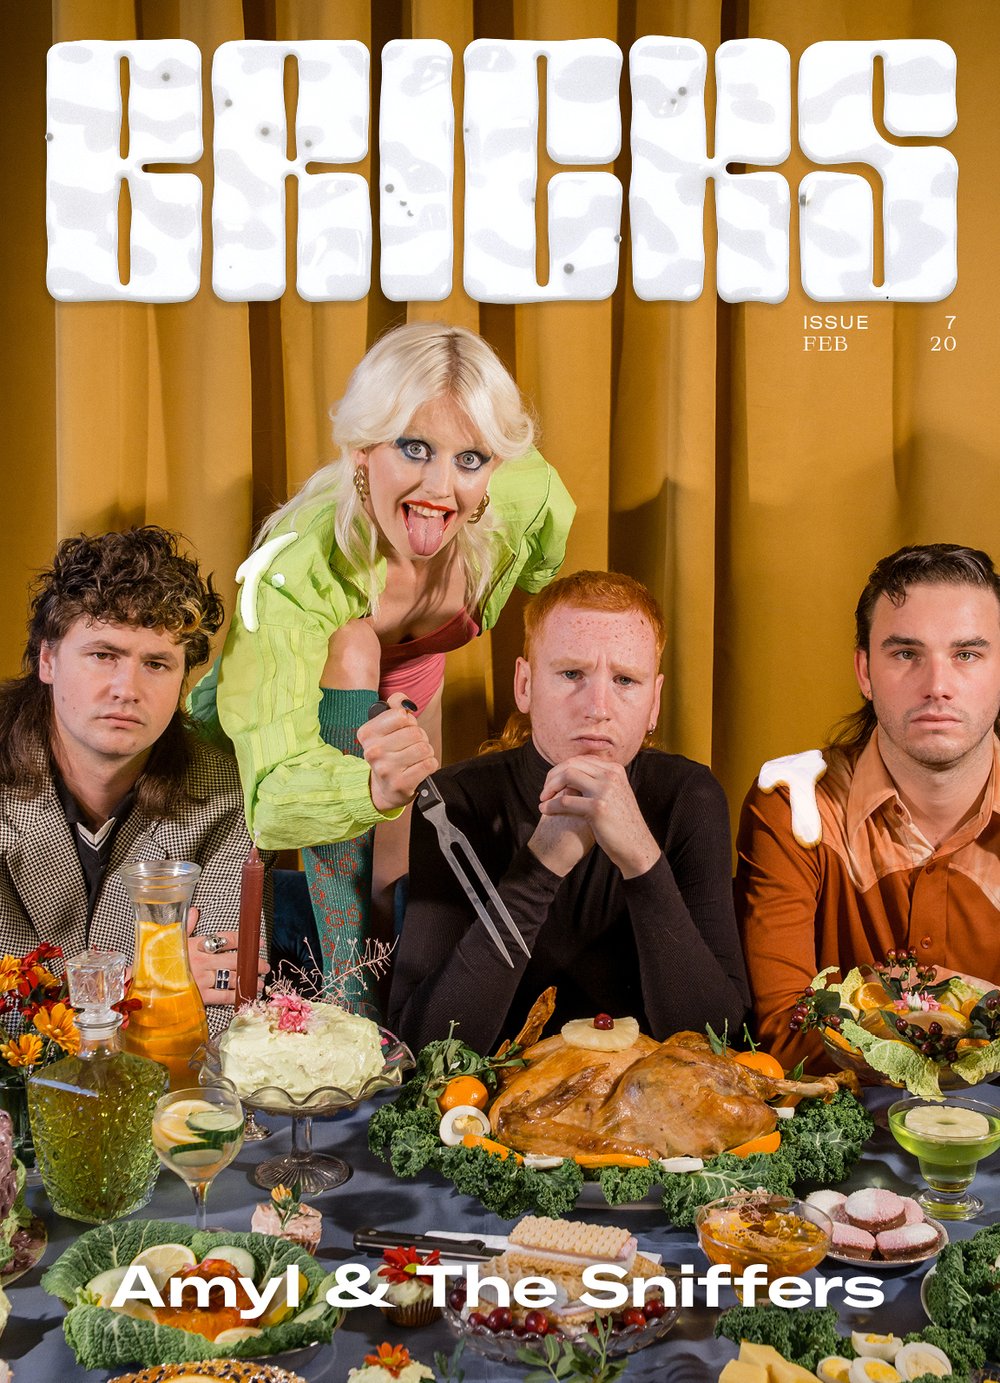 Image of #7 - The Rise Together Issue - Amyl & The Sniffers